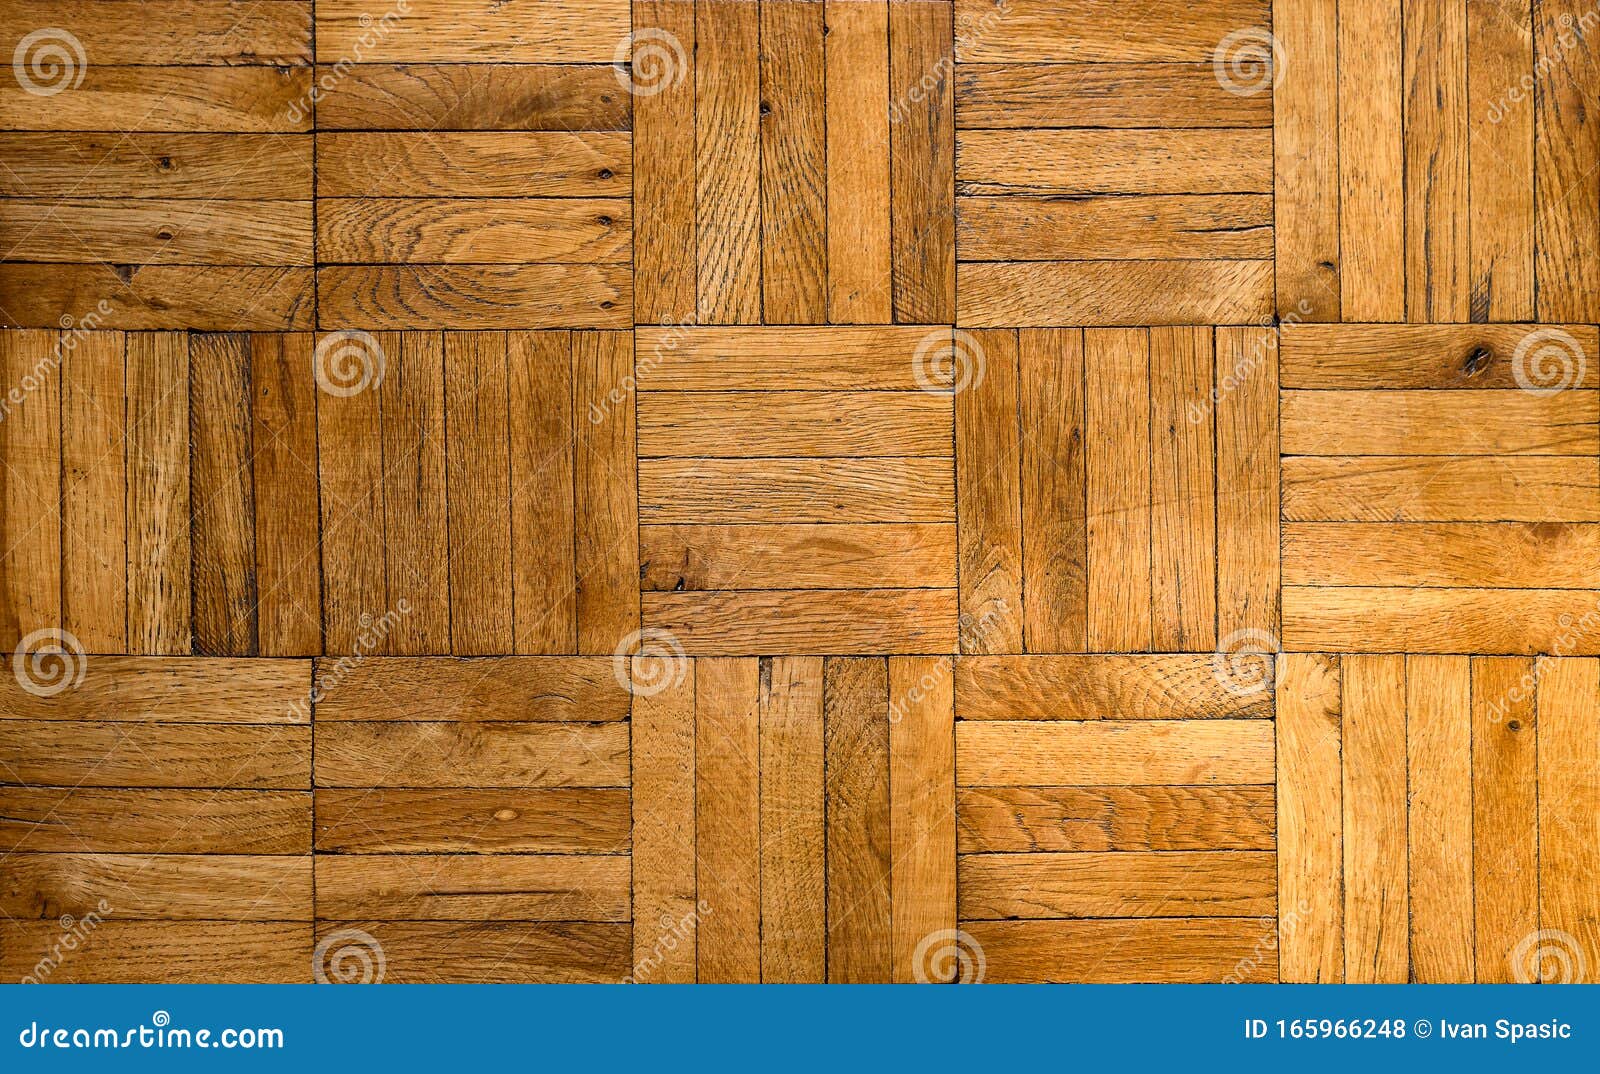 Old Wooden Parquet Floor Background Stock Photo Image Of